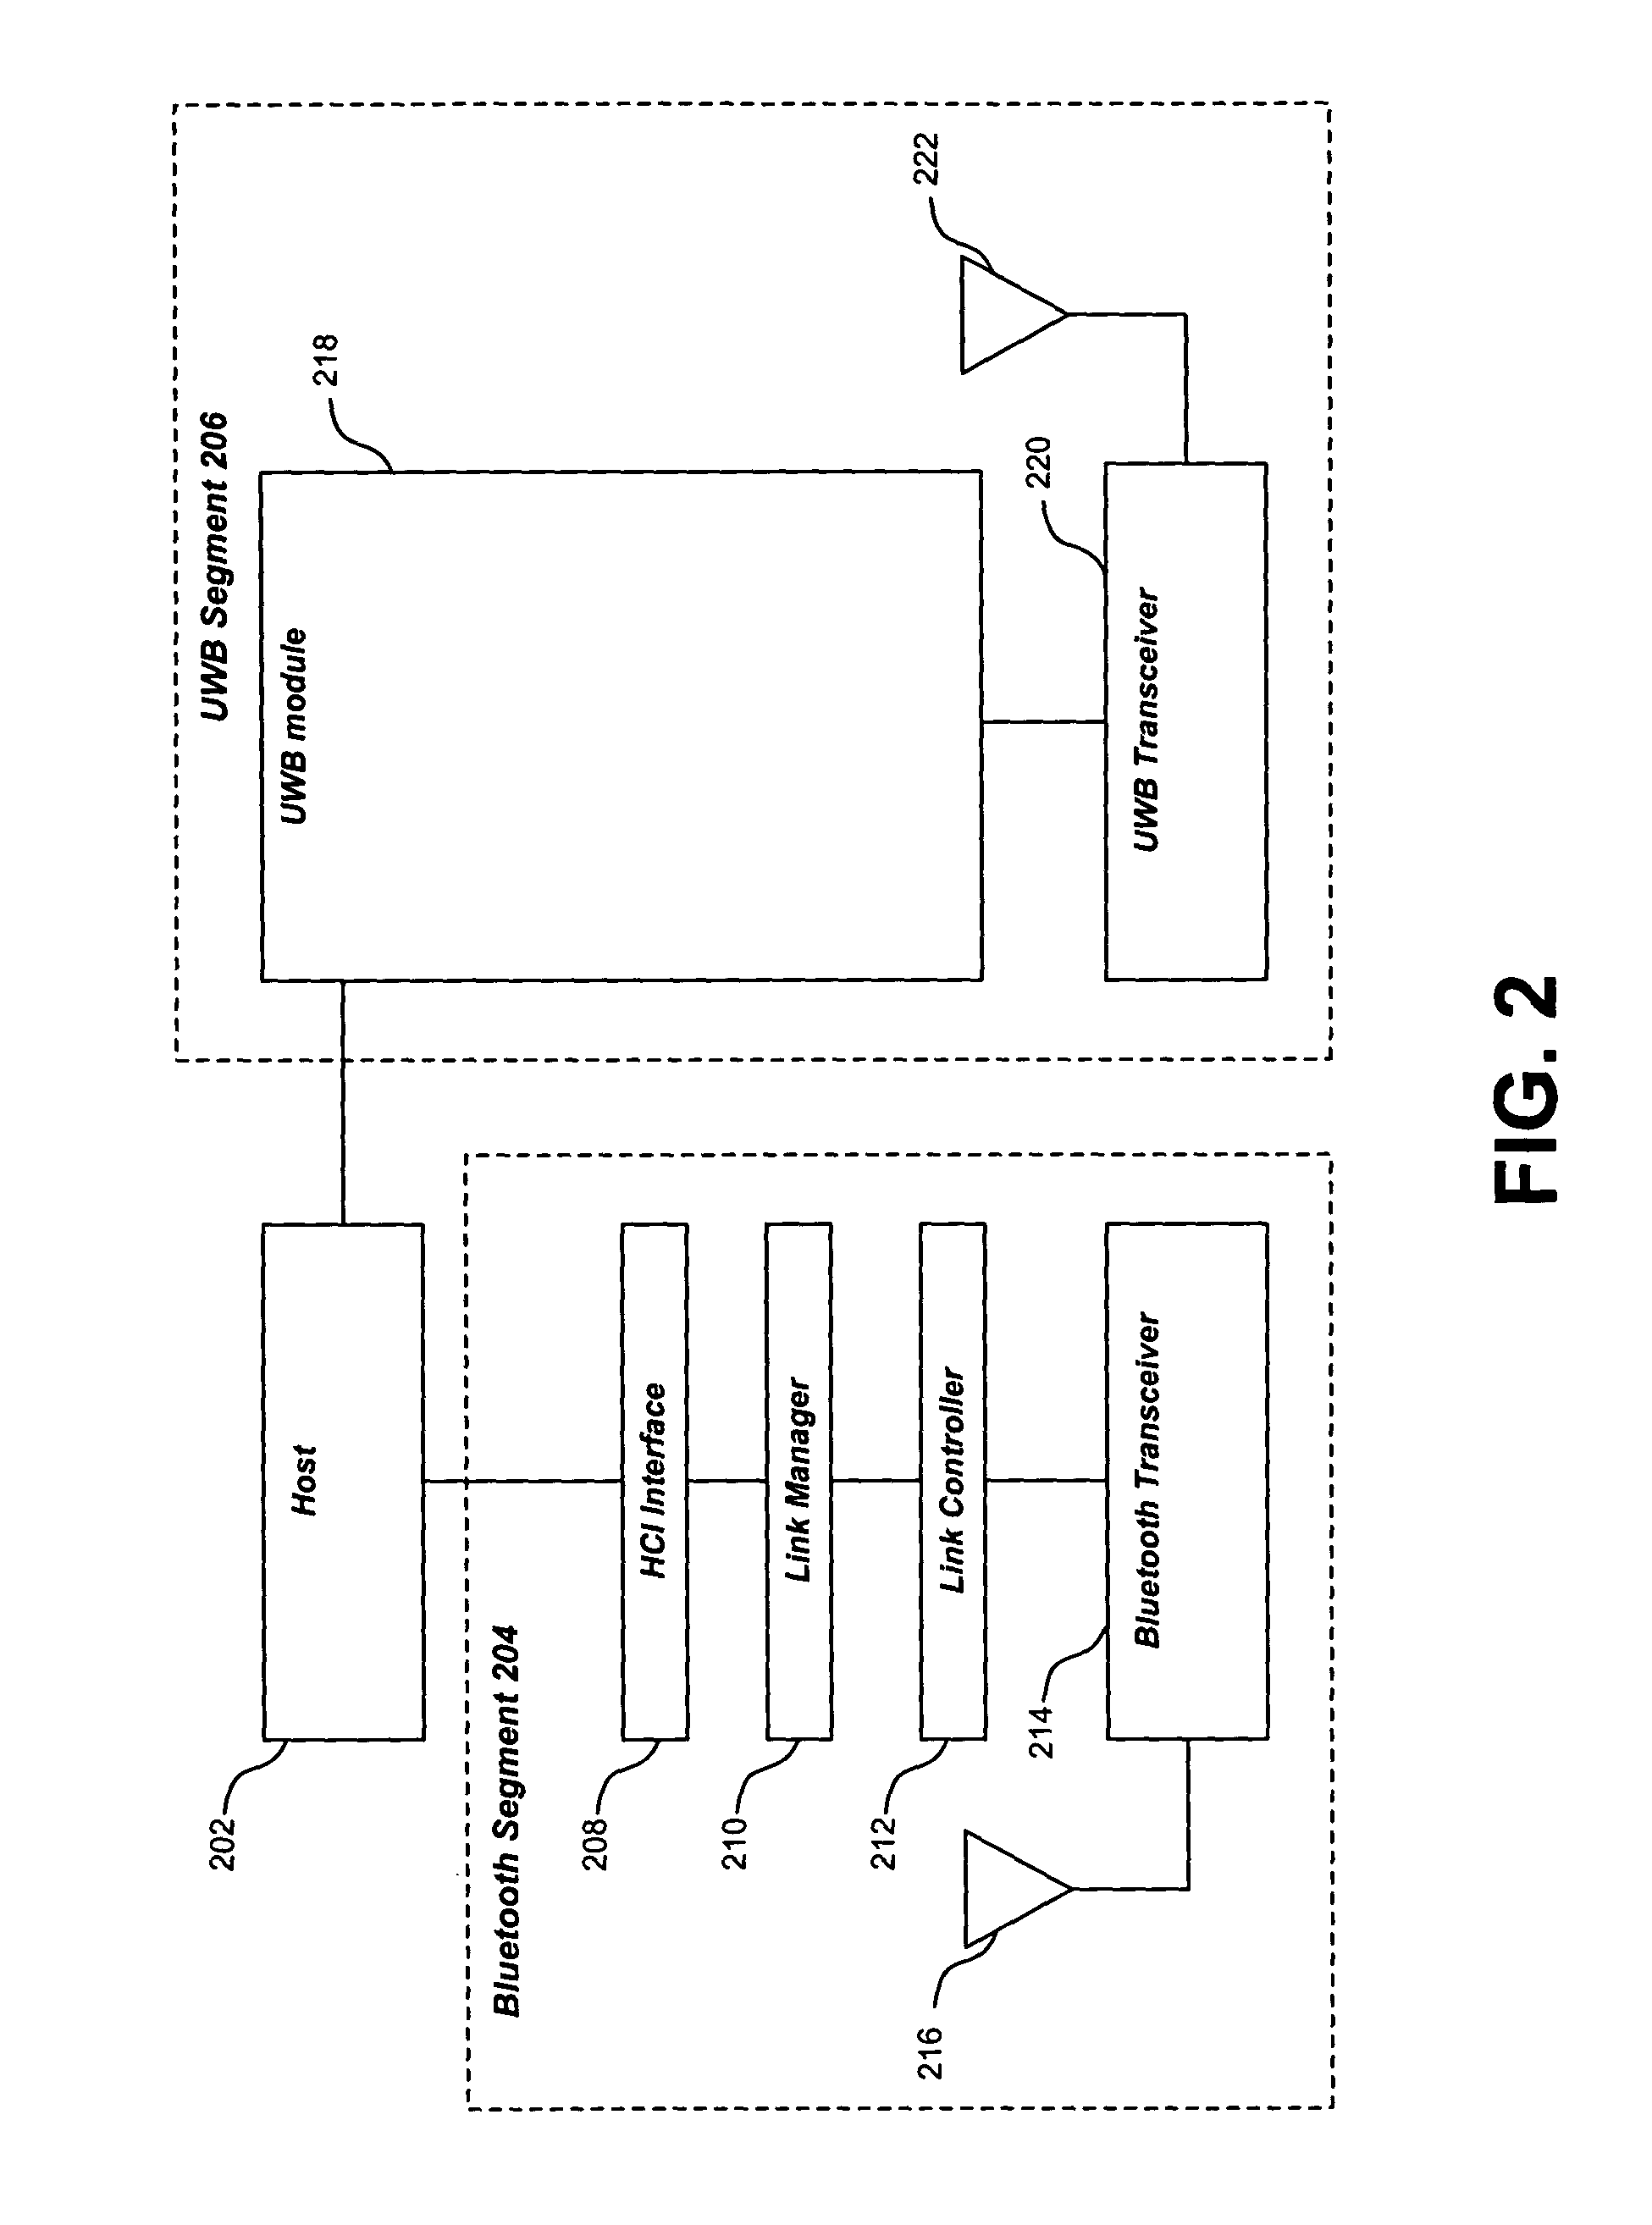 Method and system for establishing a wireless communications link